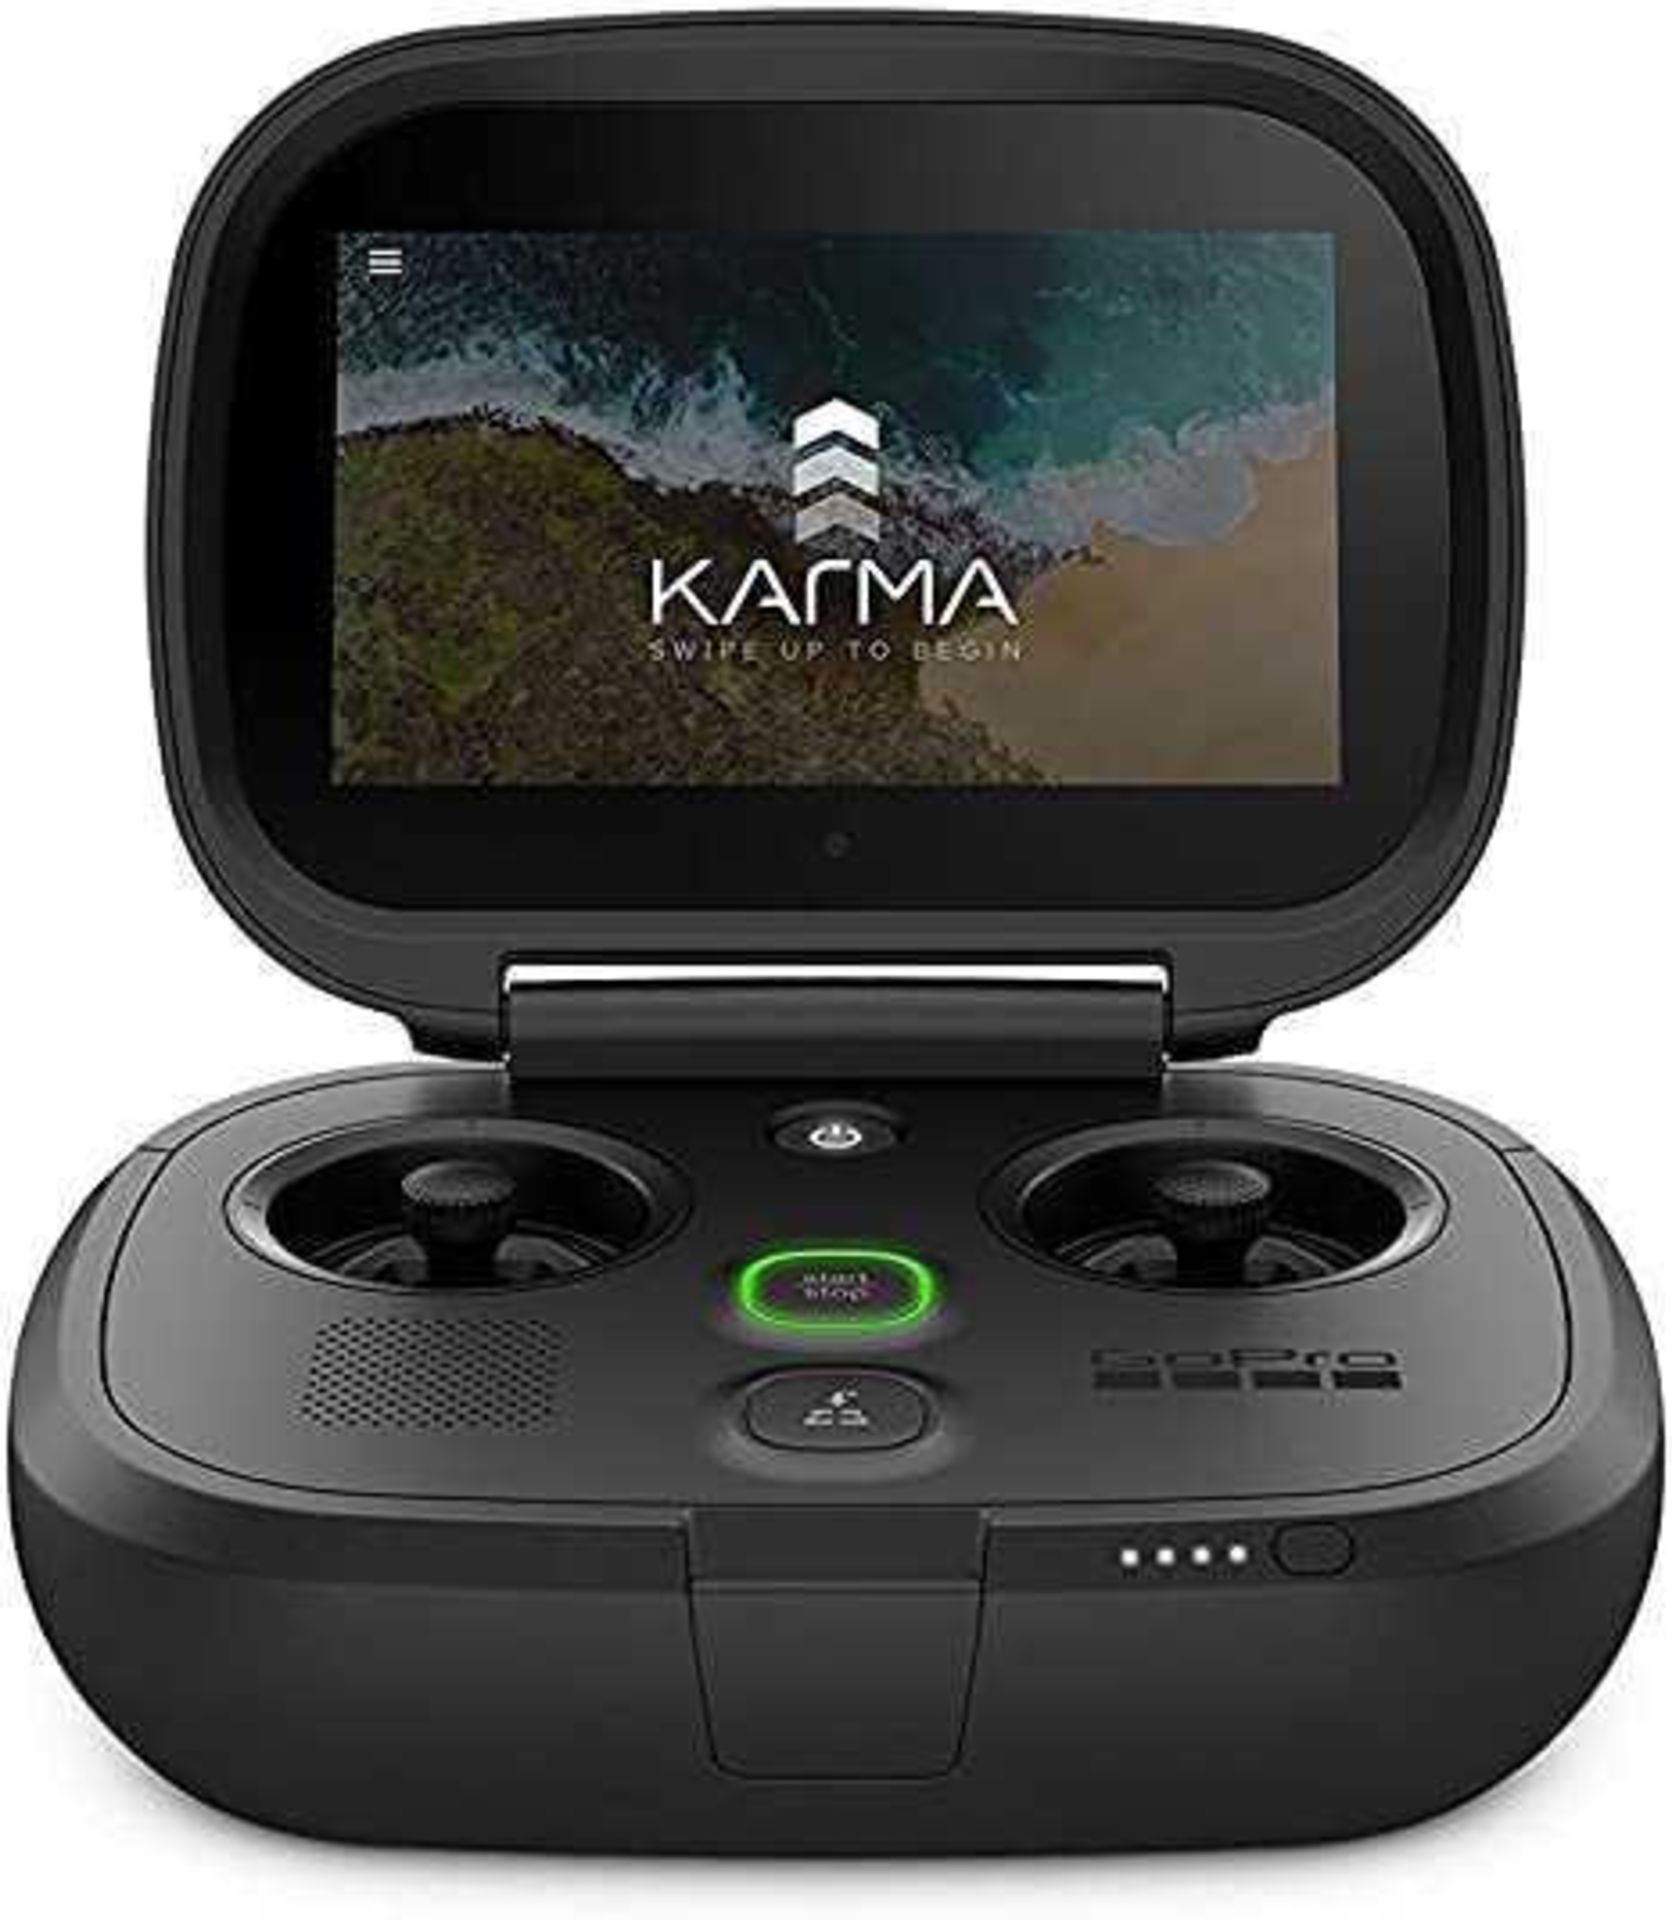 RRP 300 Boxed Gopro Karma Controller (Appraisals Available Upon Request) (Images for Illustration